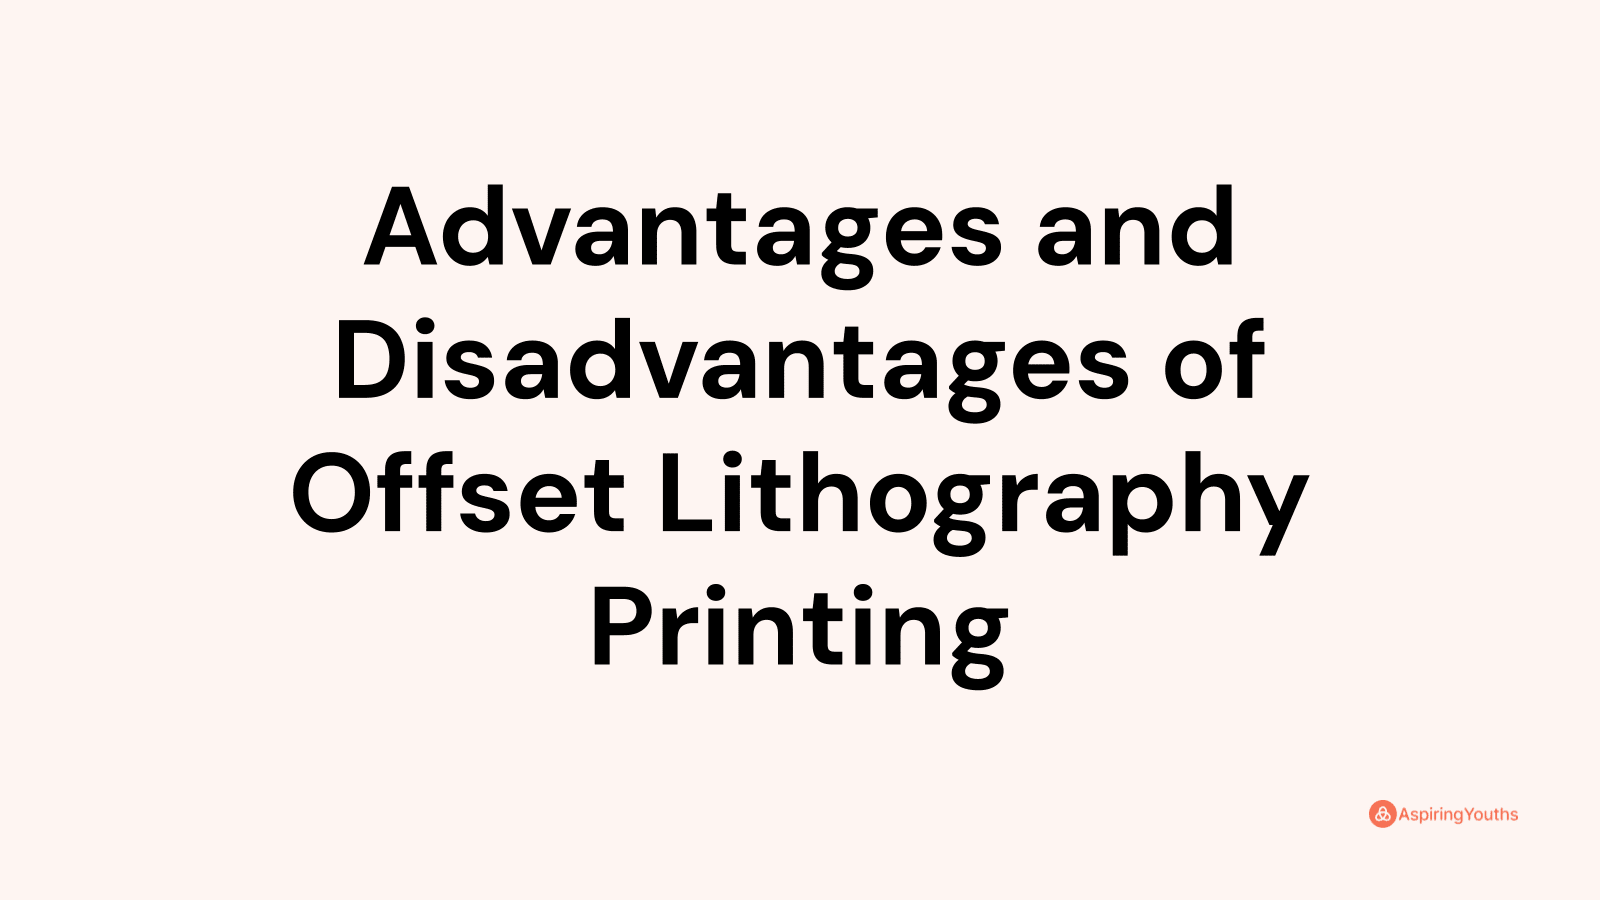 Advantages and disadvantages of Offset Lithography Printing